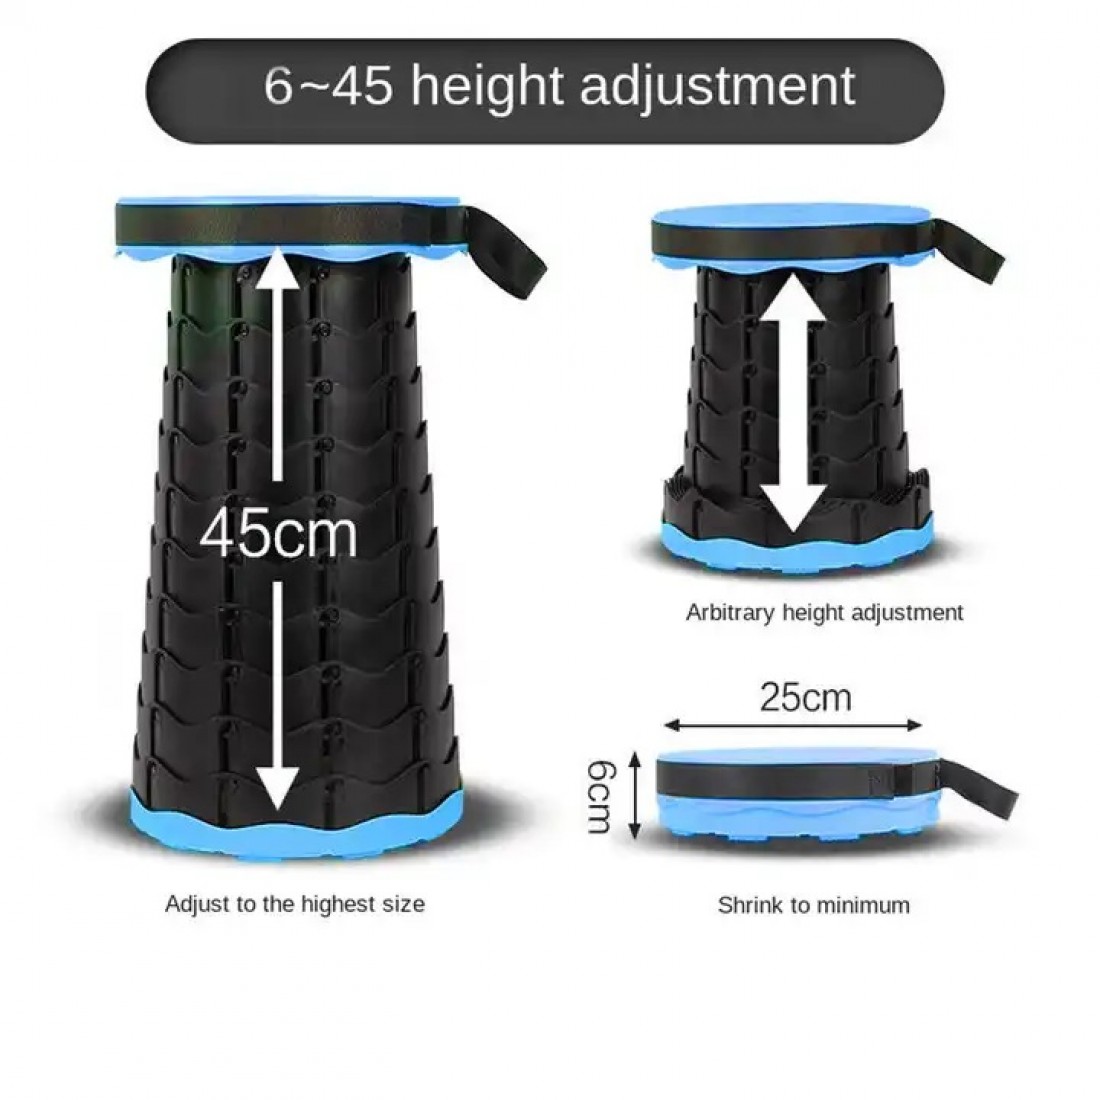 Outdoor Portable Telescopic Stool | Outdoor Fishing Picnic Camping Travel Chair Seat